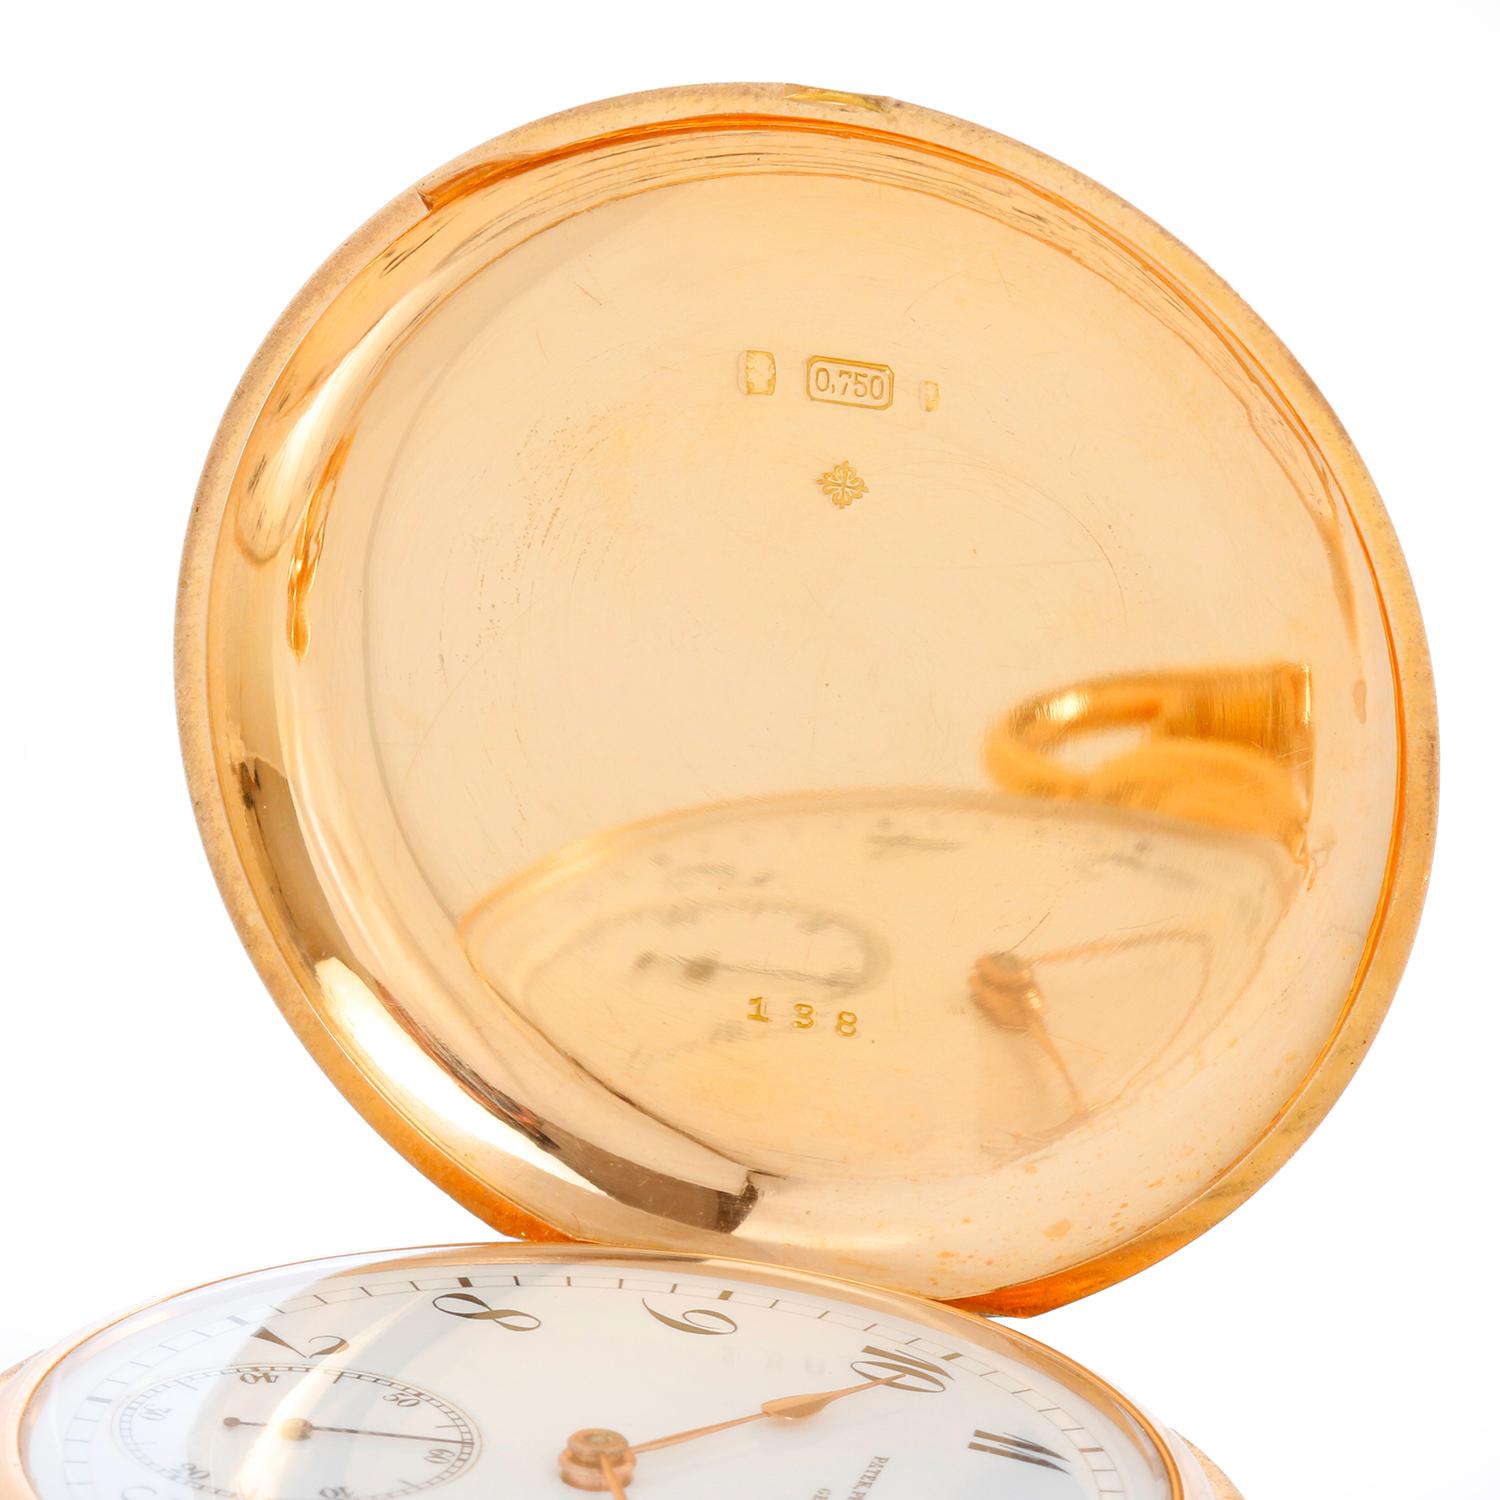 Patek Philippe 18K  Hunting Case Pocket Watch - Manual winding. 18K Yellow Gold case (51mm) . White dial with black Arabic numerals sub seconds at 6 o'clock position; Gold hands. Case & dial are signed. Pre-owned with Patek Philippe box.